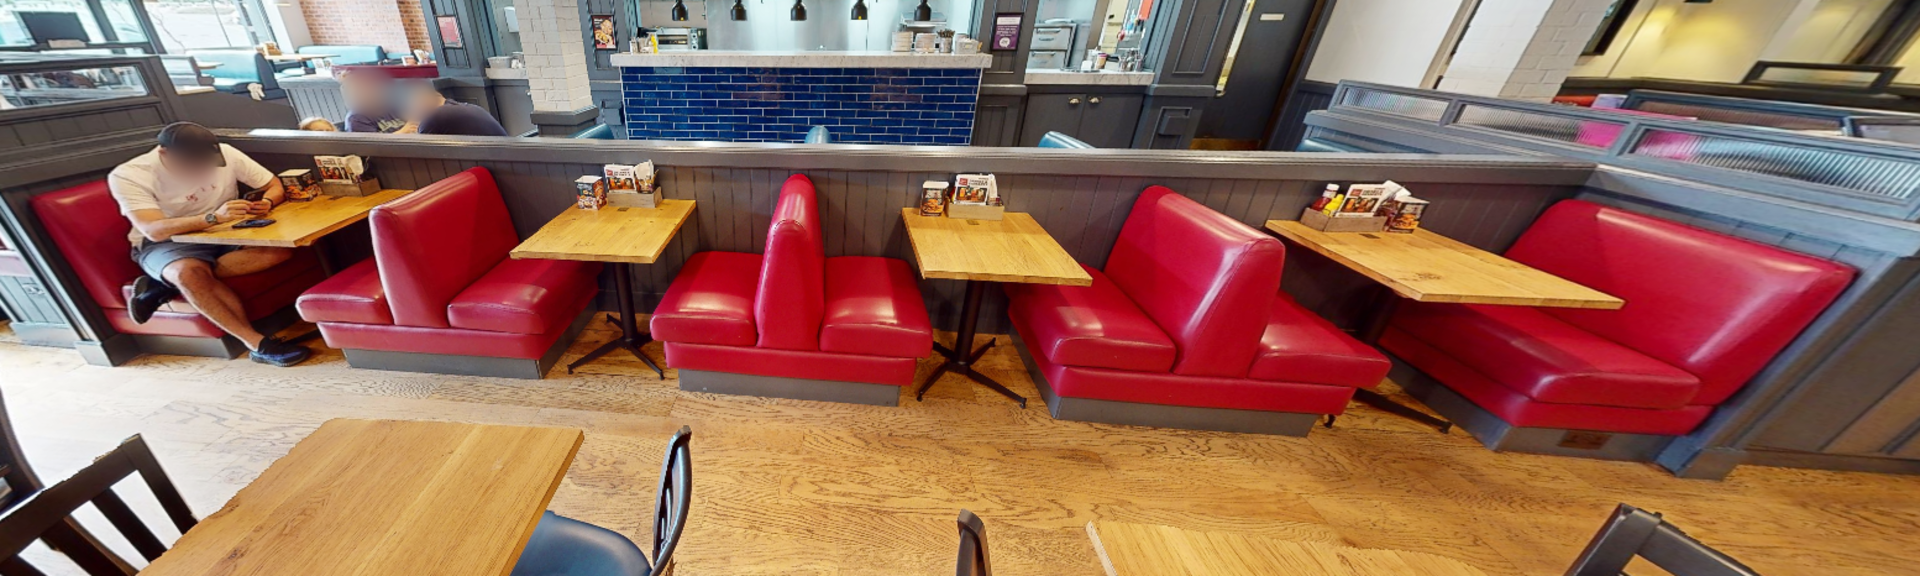 1 x Collection of Restaurant Seating Benches - Single Seat Benches in Red Faux Leather - Image 2 of 6